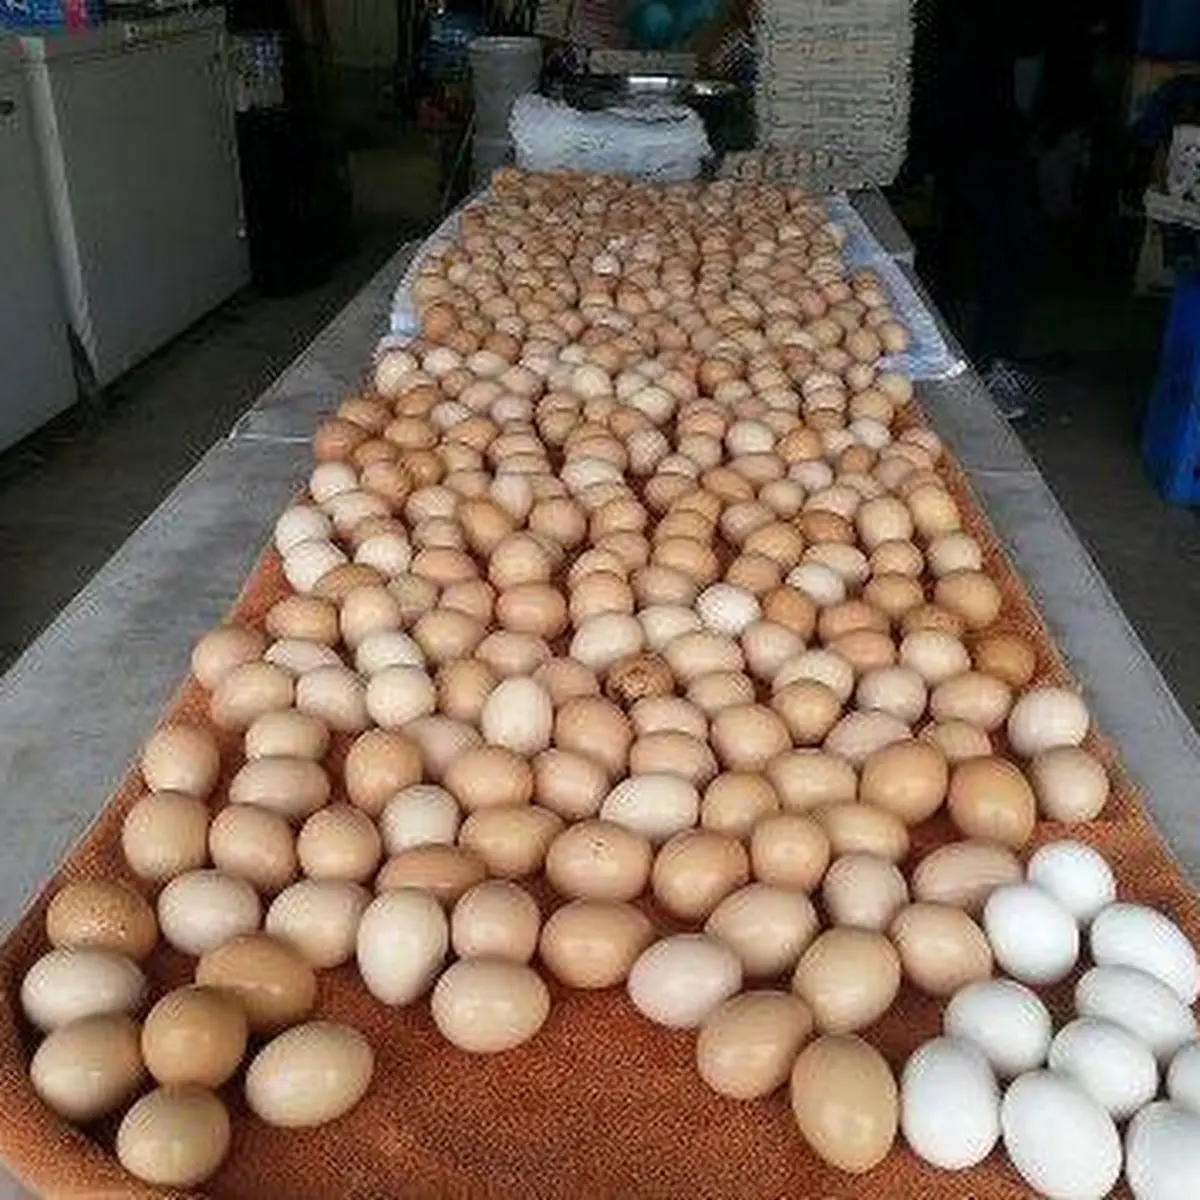 High Quality White Brown Shell Fresh Table Chicken Eggs Available For Sale At Low Price